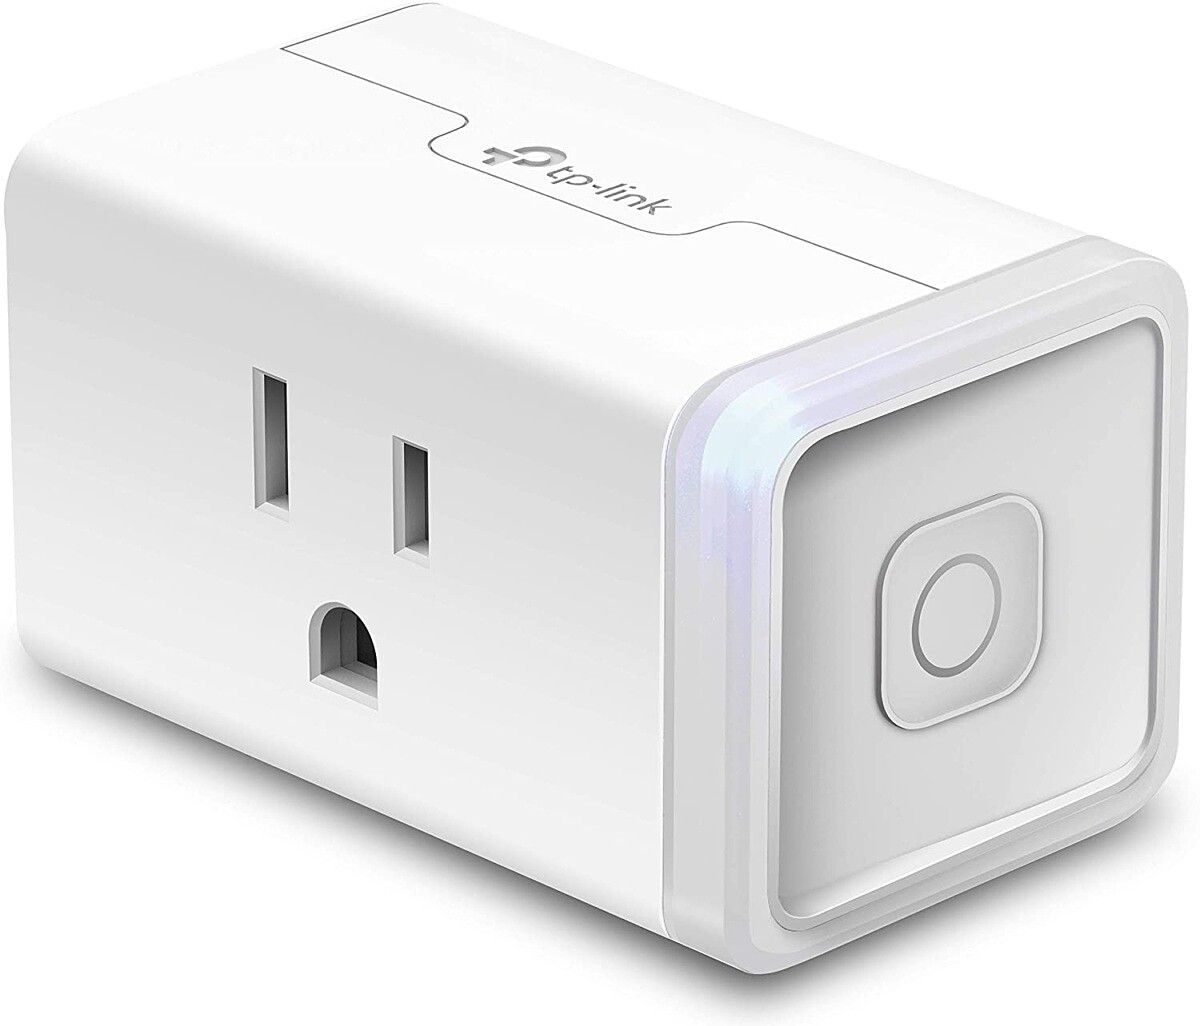 This compact smart plug is down to just $7.50 on Amazon right now. Click the coupon button on the product page to get the discount.